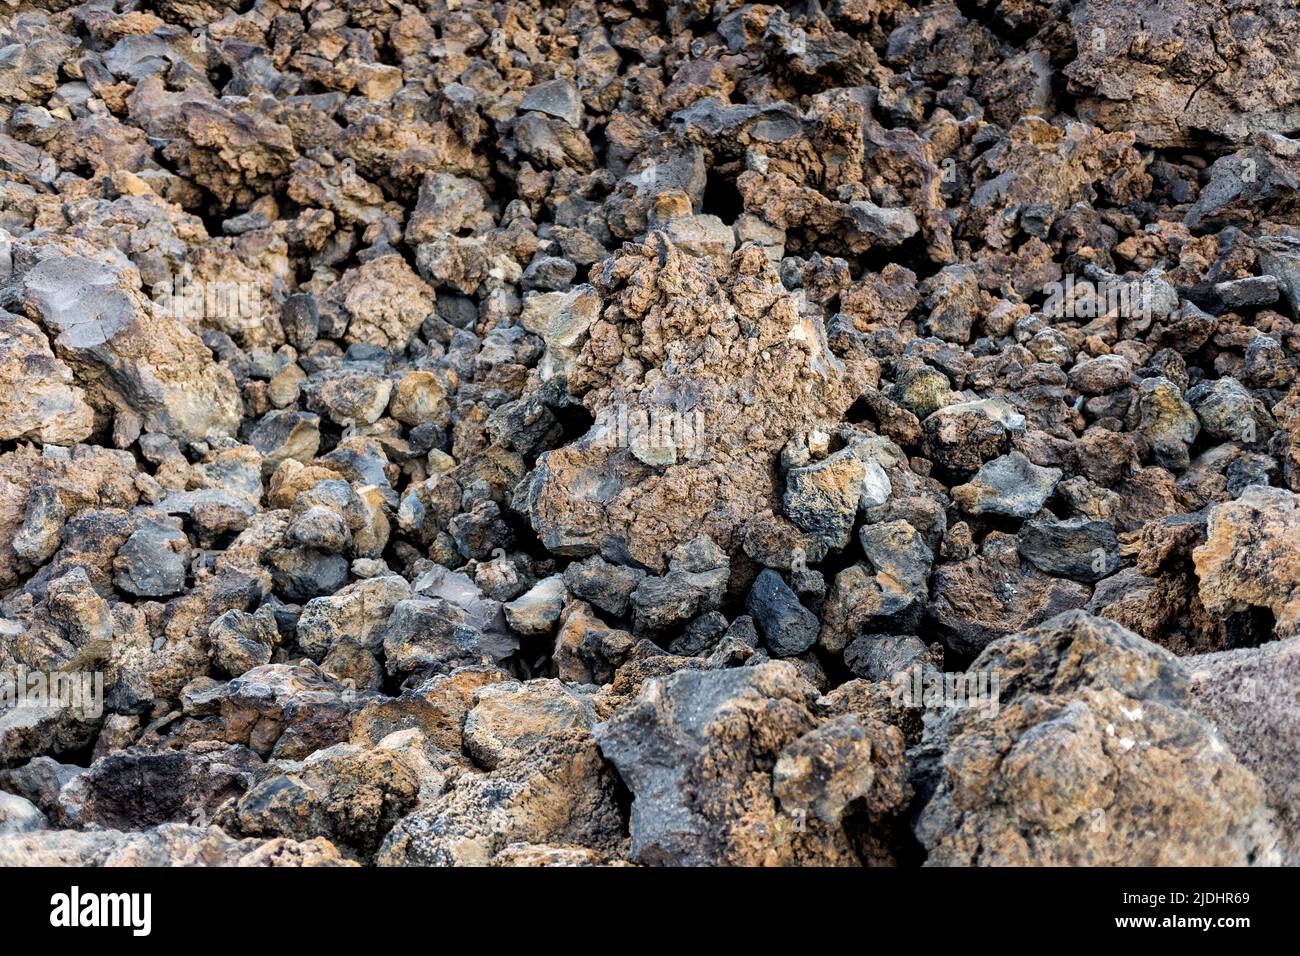 Rough, rugged solid lava rocks. Stock Photo